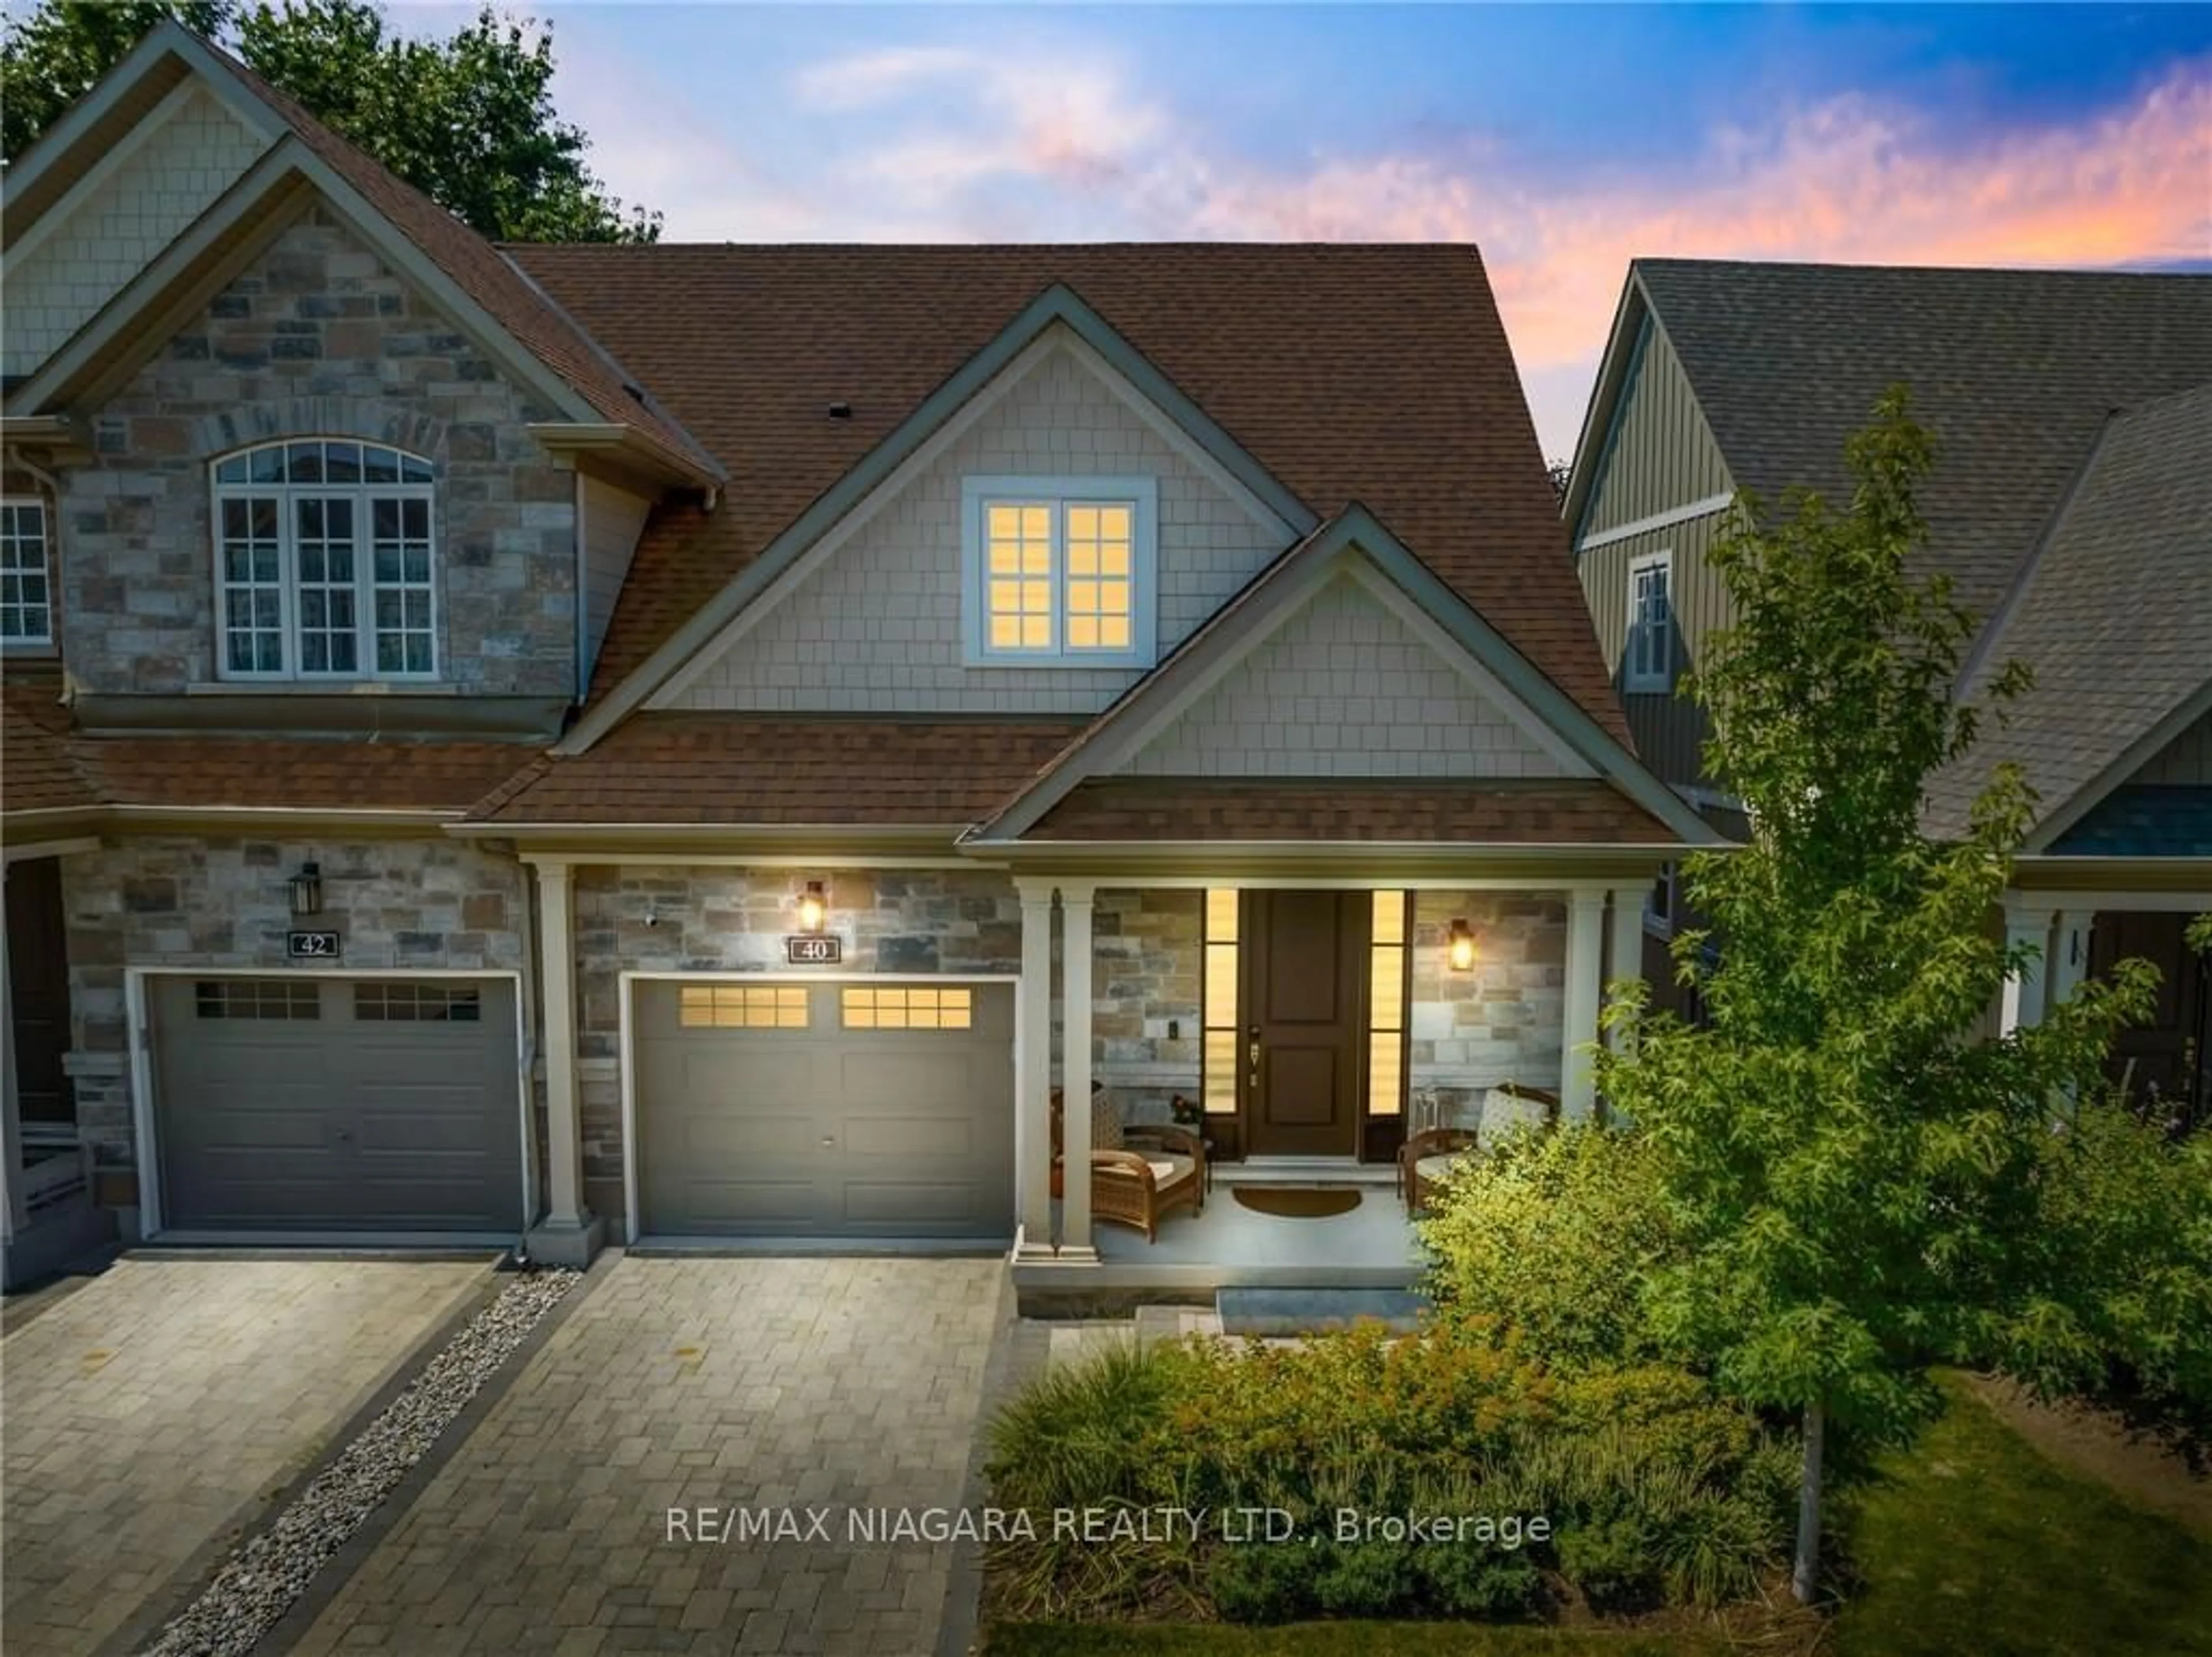 Home with brick exterior material for 40 Windsor Circ, Niagara-on-the-Lake Ontario L0S 1J0